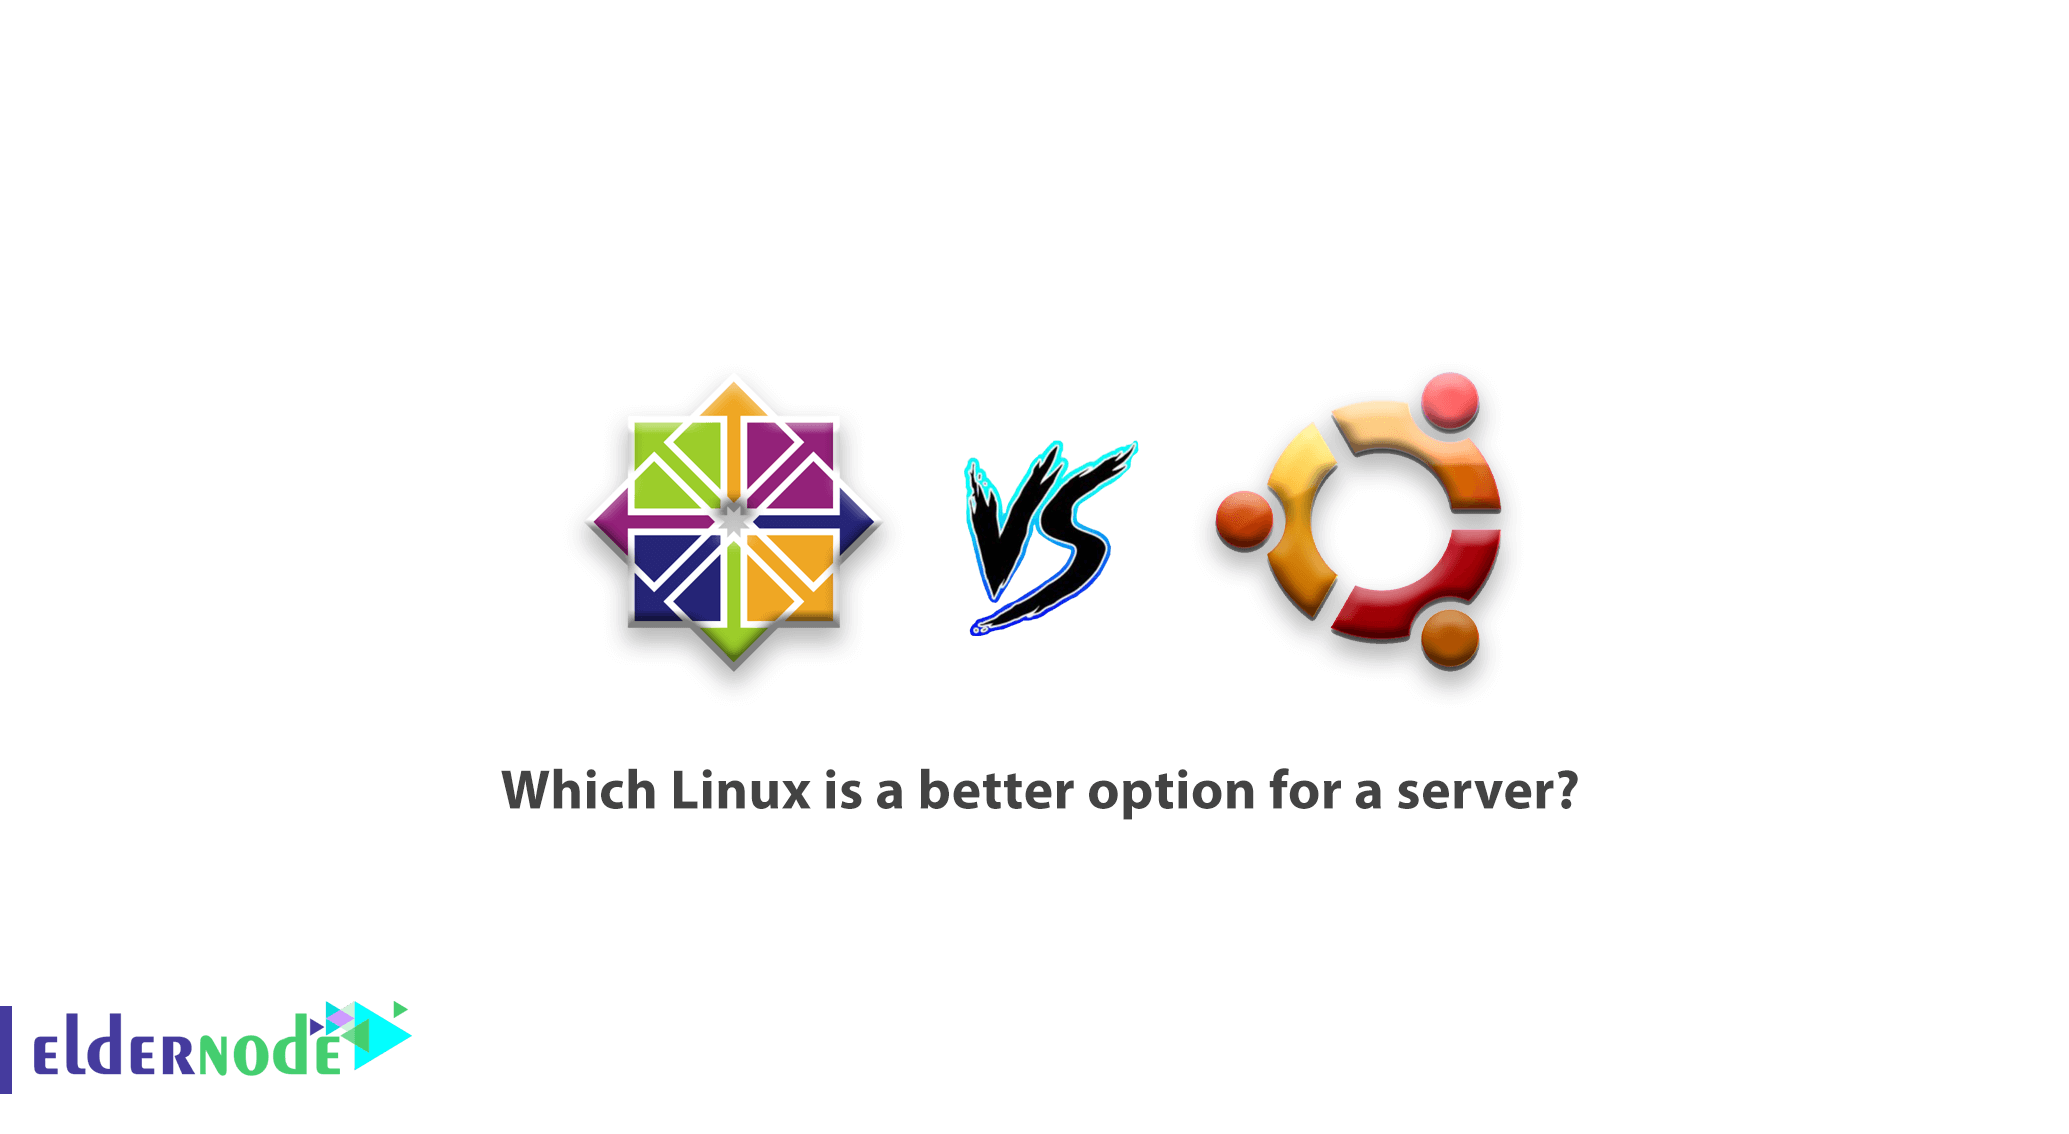 Which Linux is a better option for a server